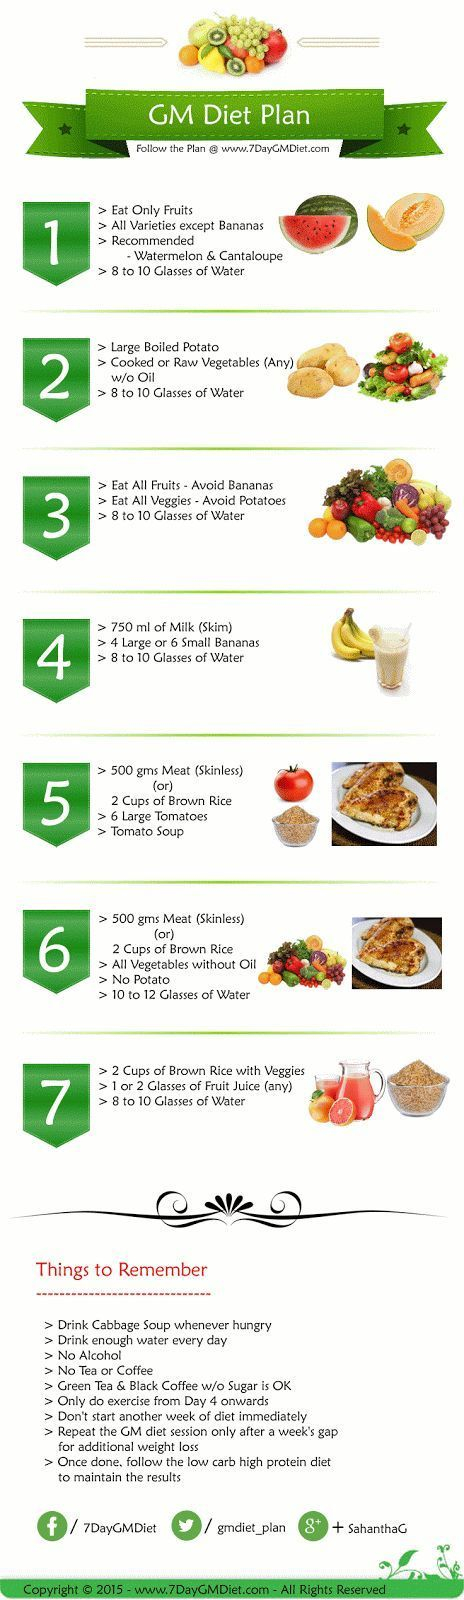 General Motors Diet Plan For 7 Days The WHOot General 